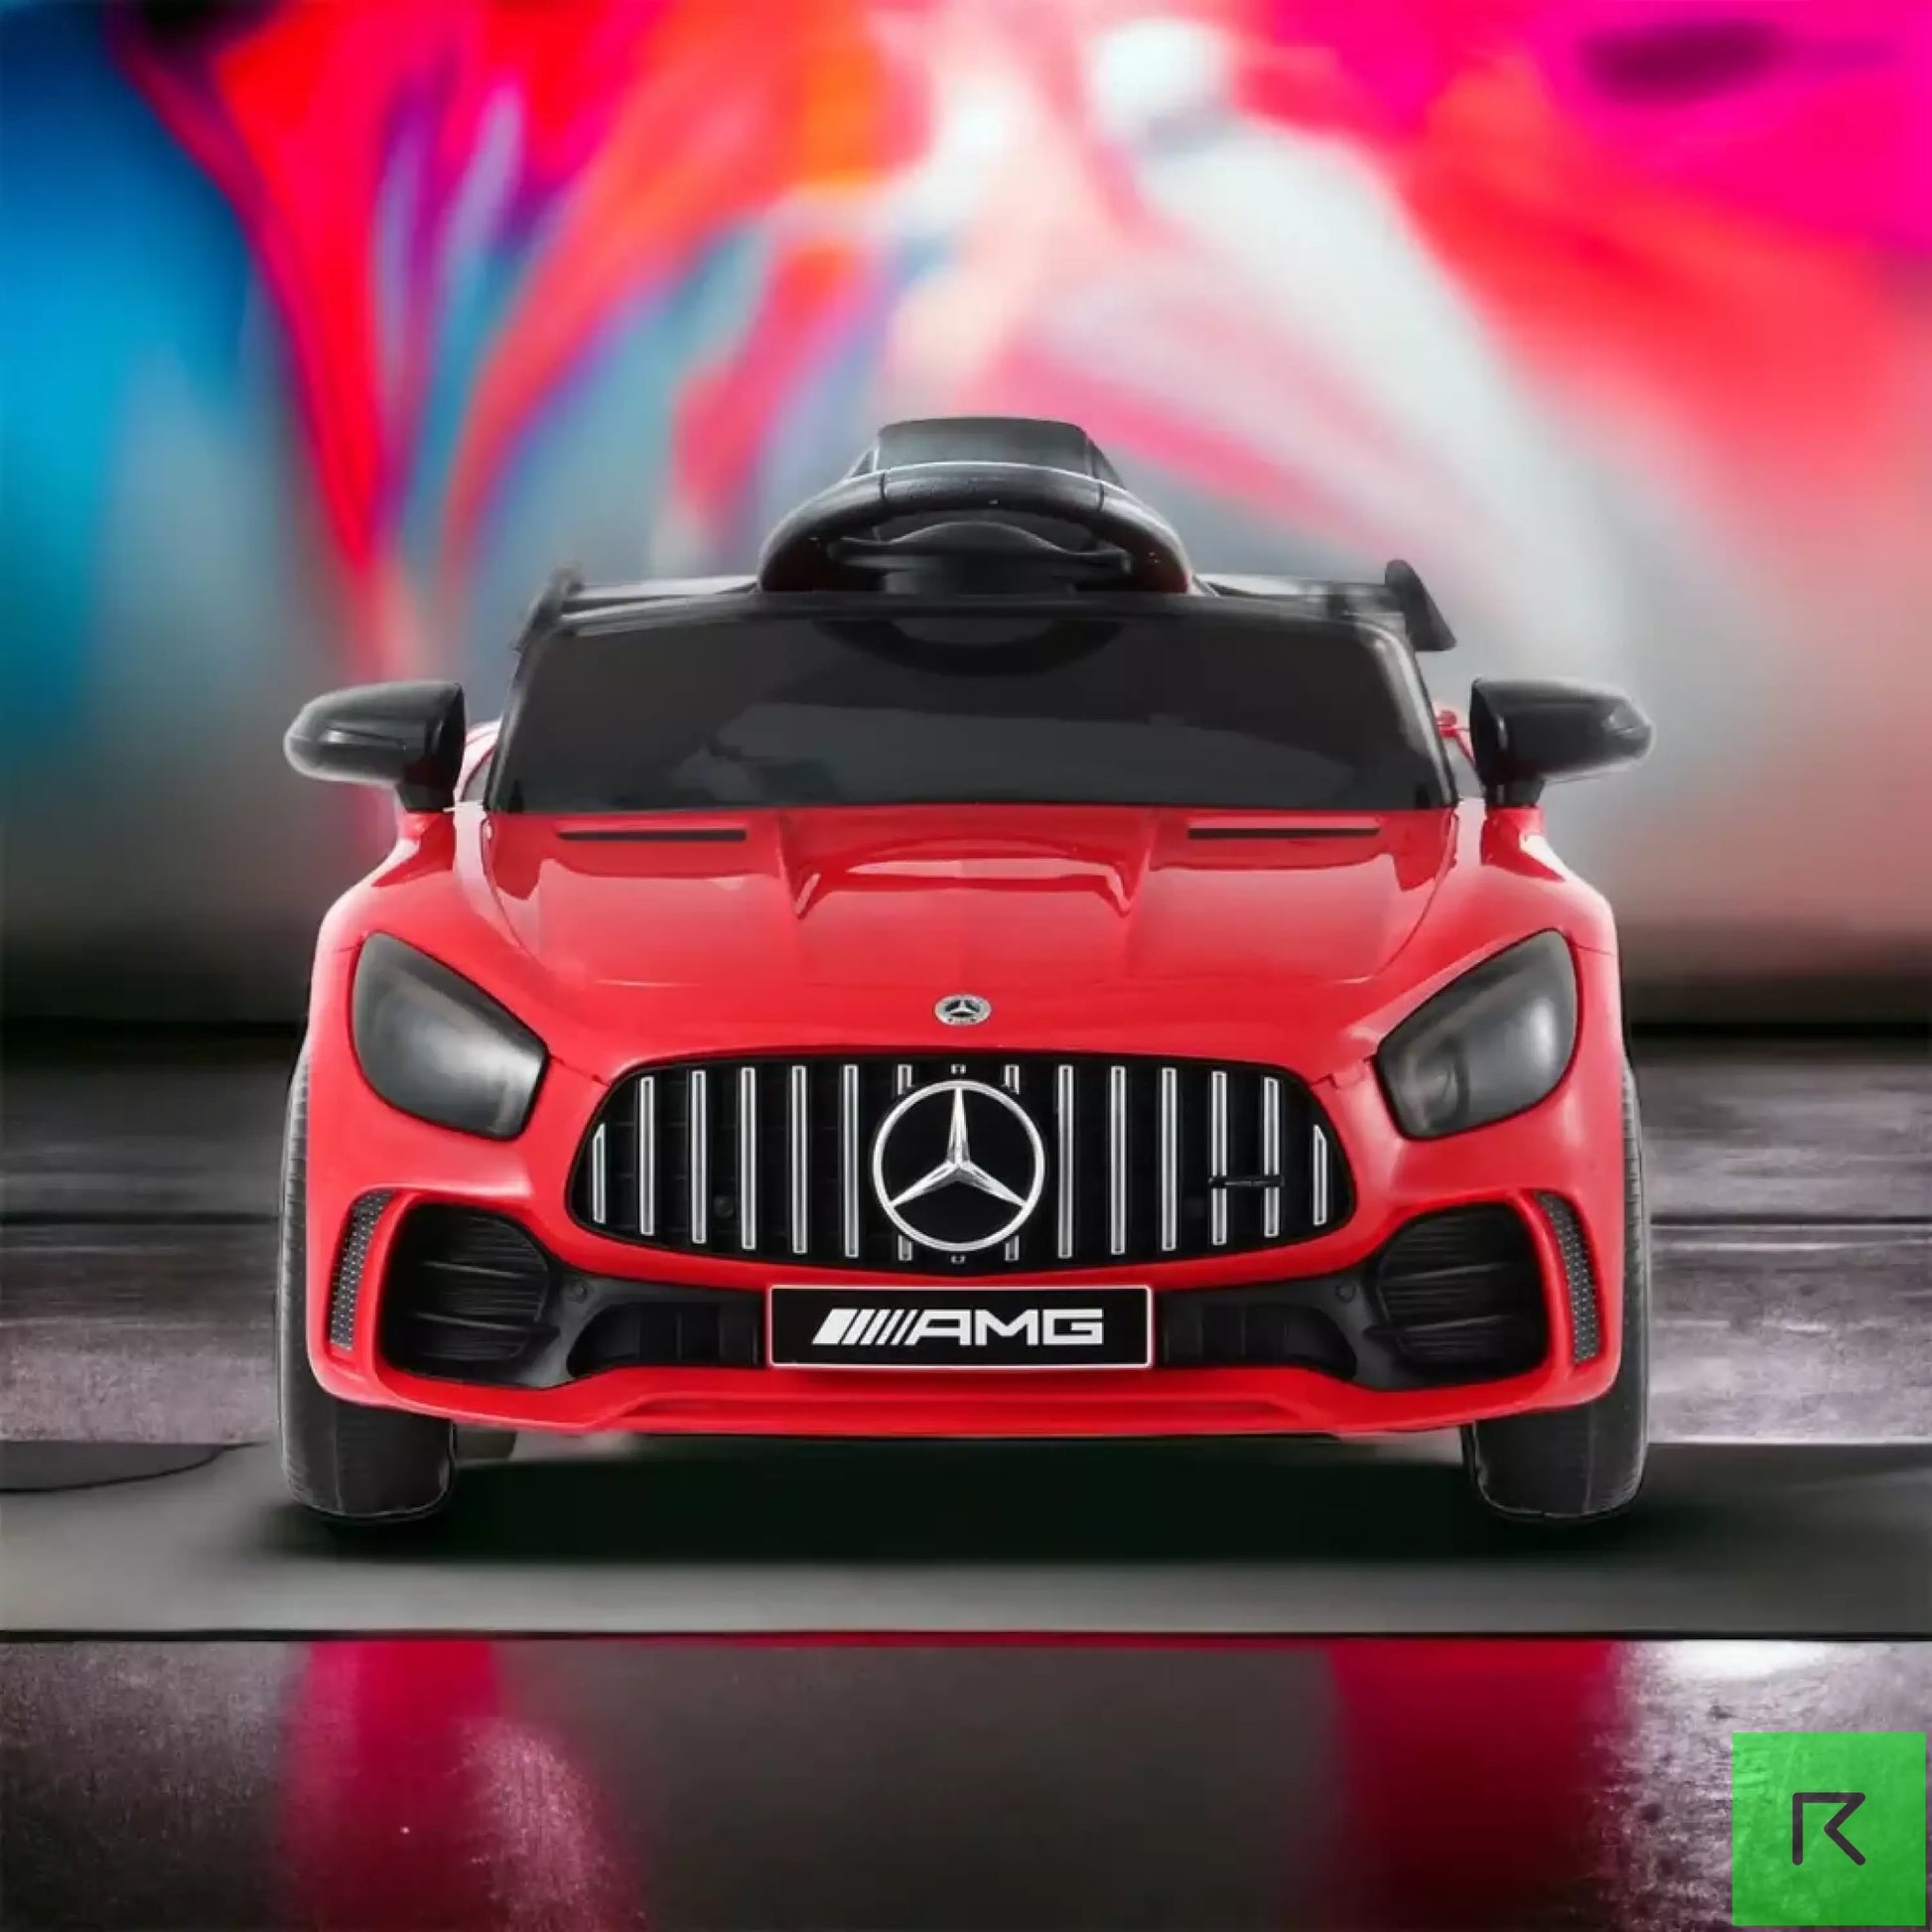 MERCEDES BENZ Kids Ride On Car Mercedes-Benz AMG GTR Electric Toy Cars 12V Red